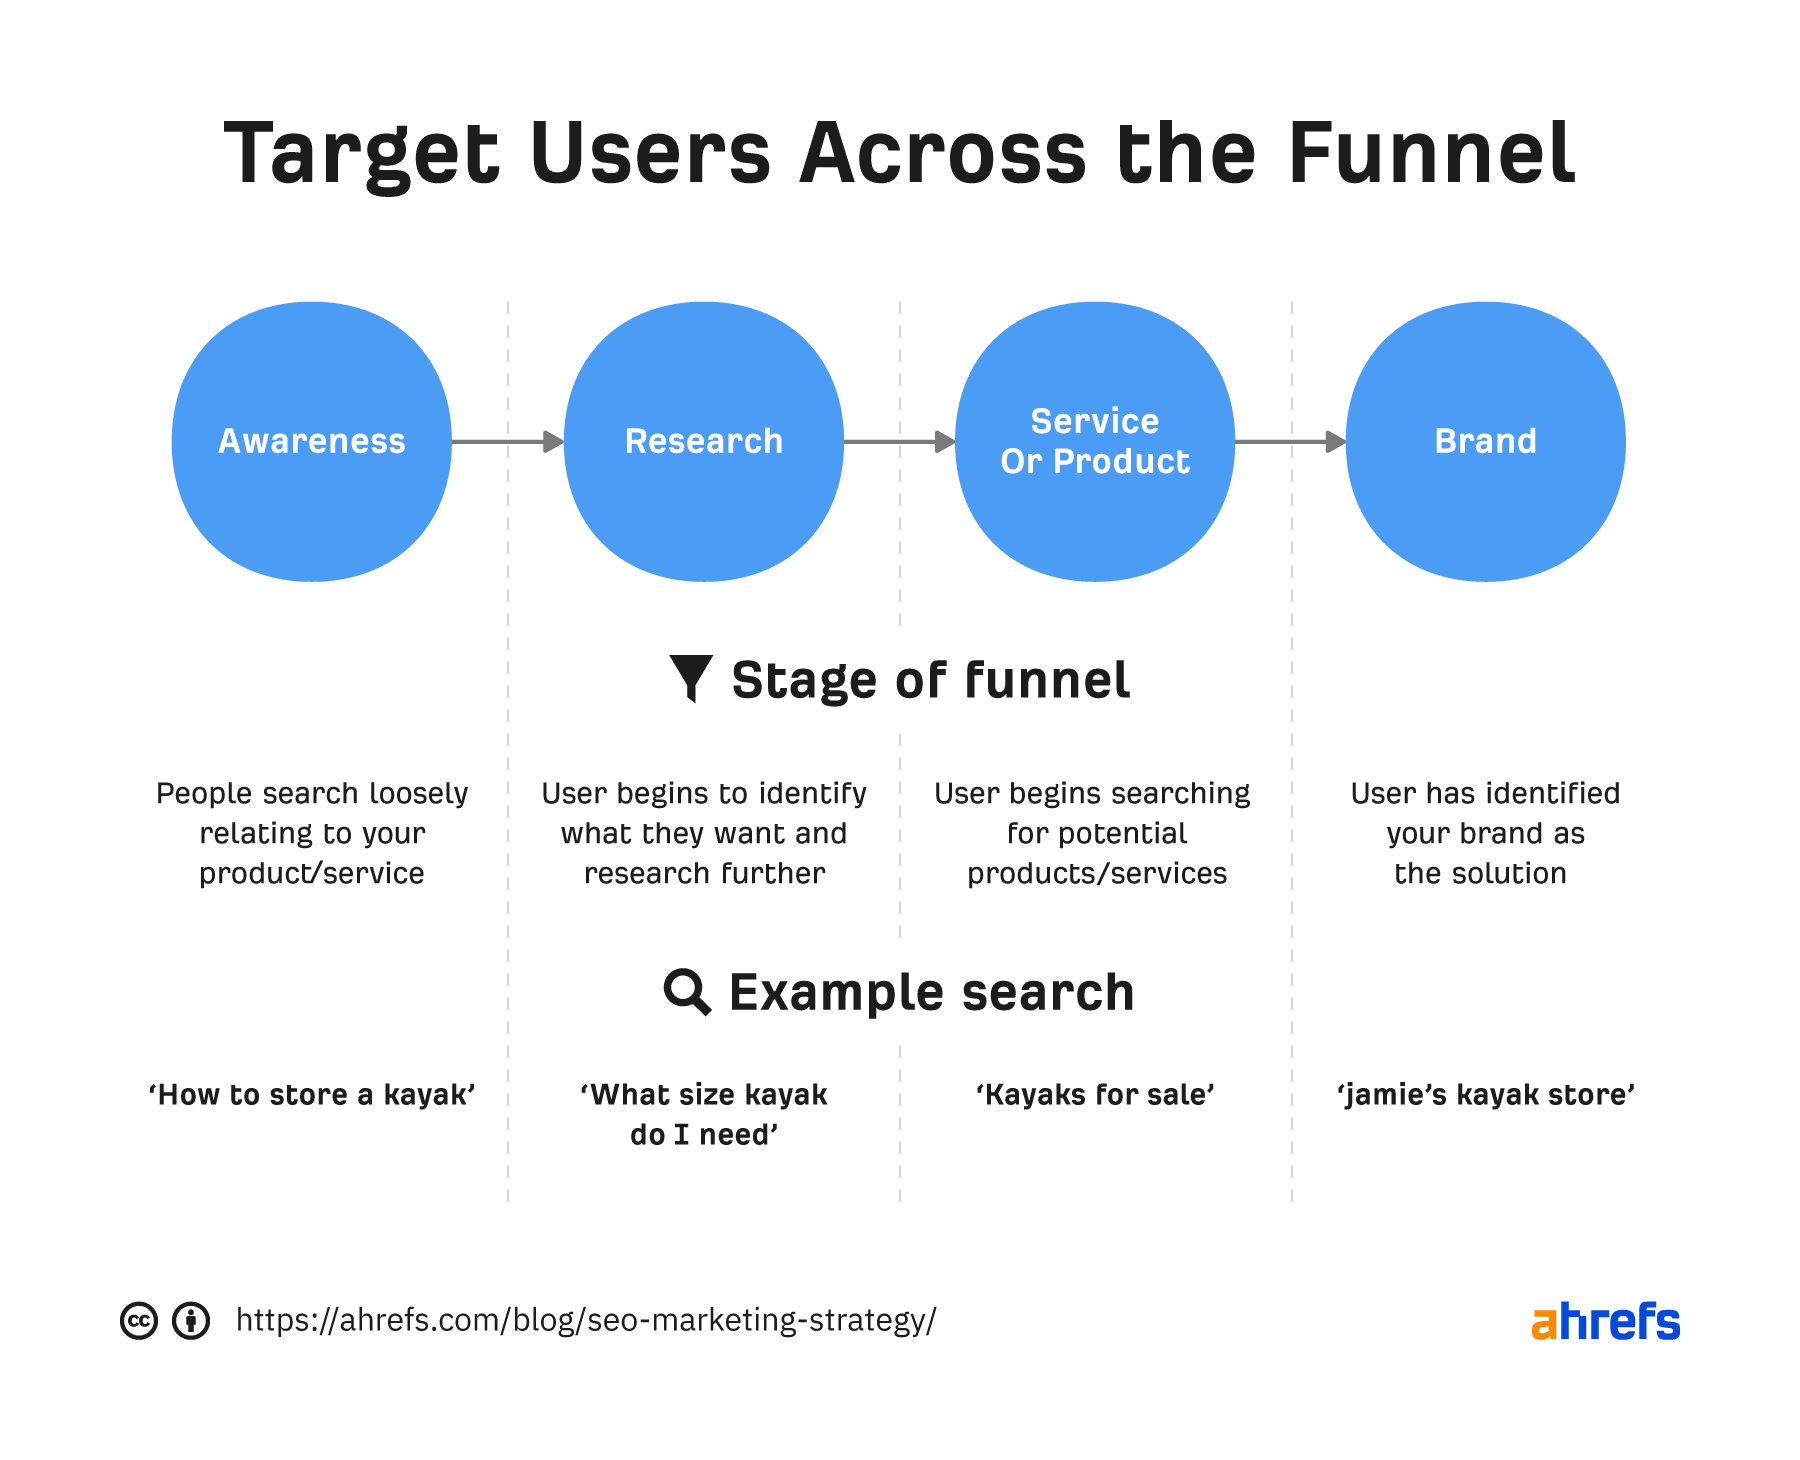 Keyword examples across the funnel
 